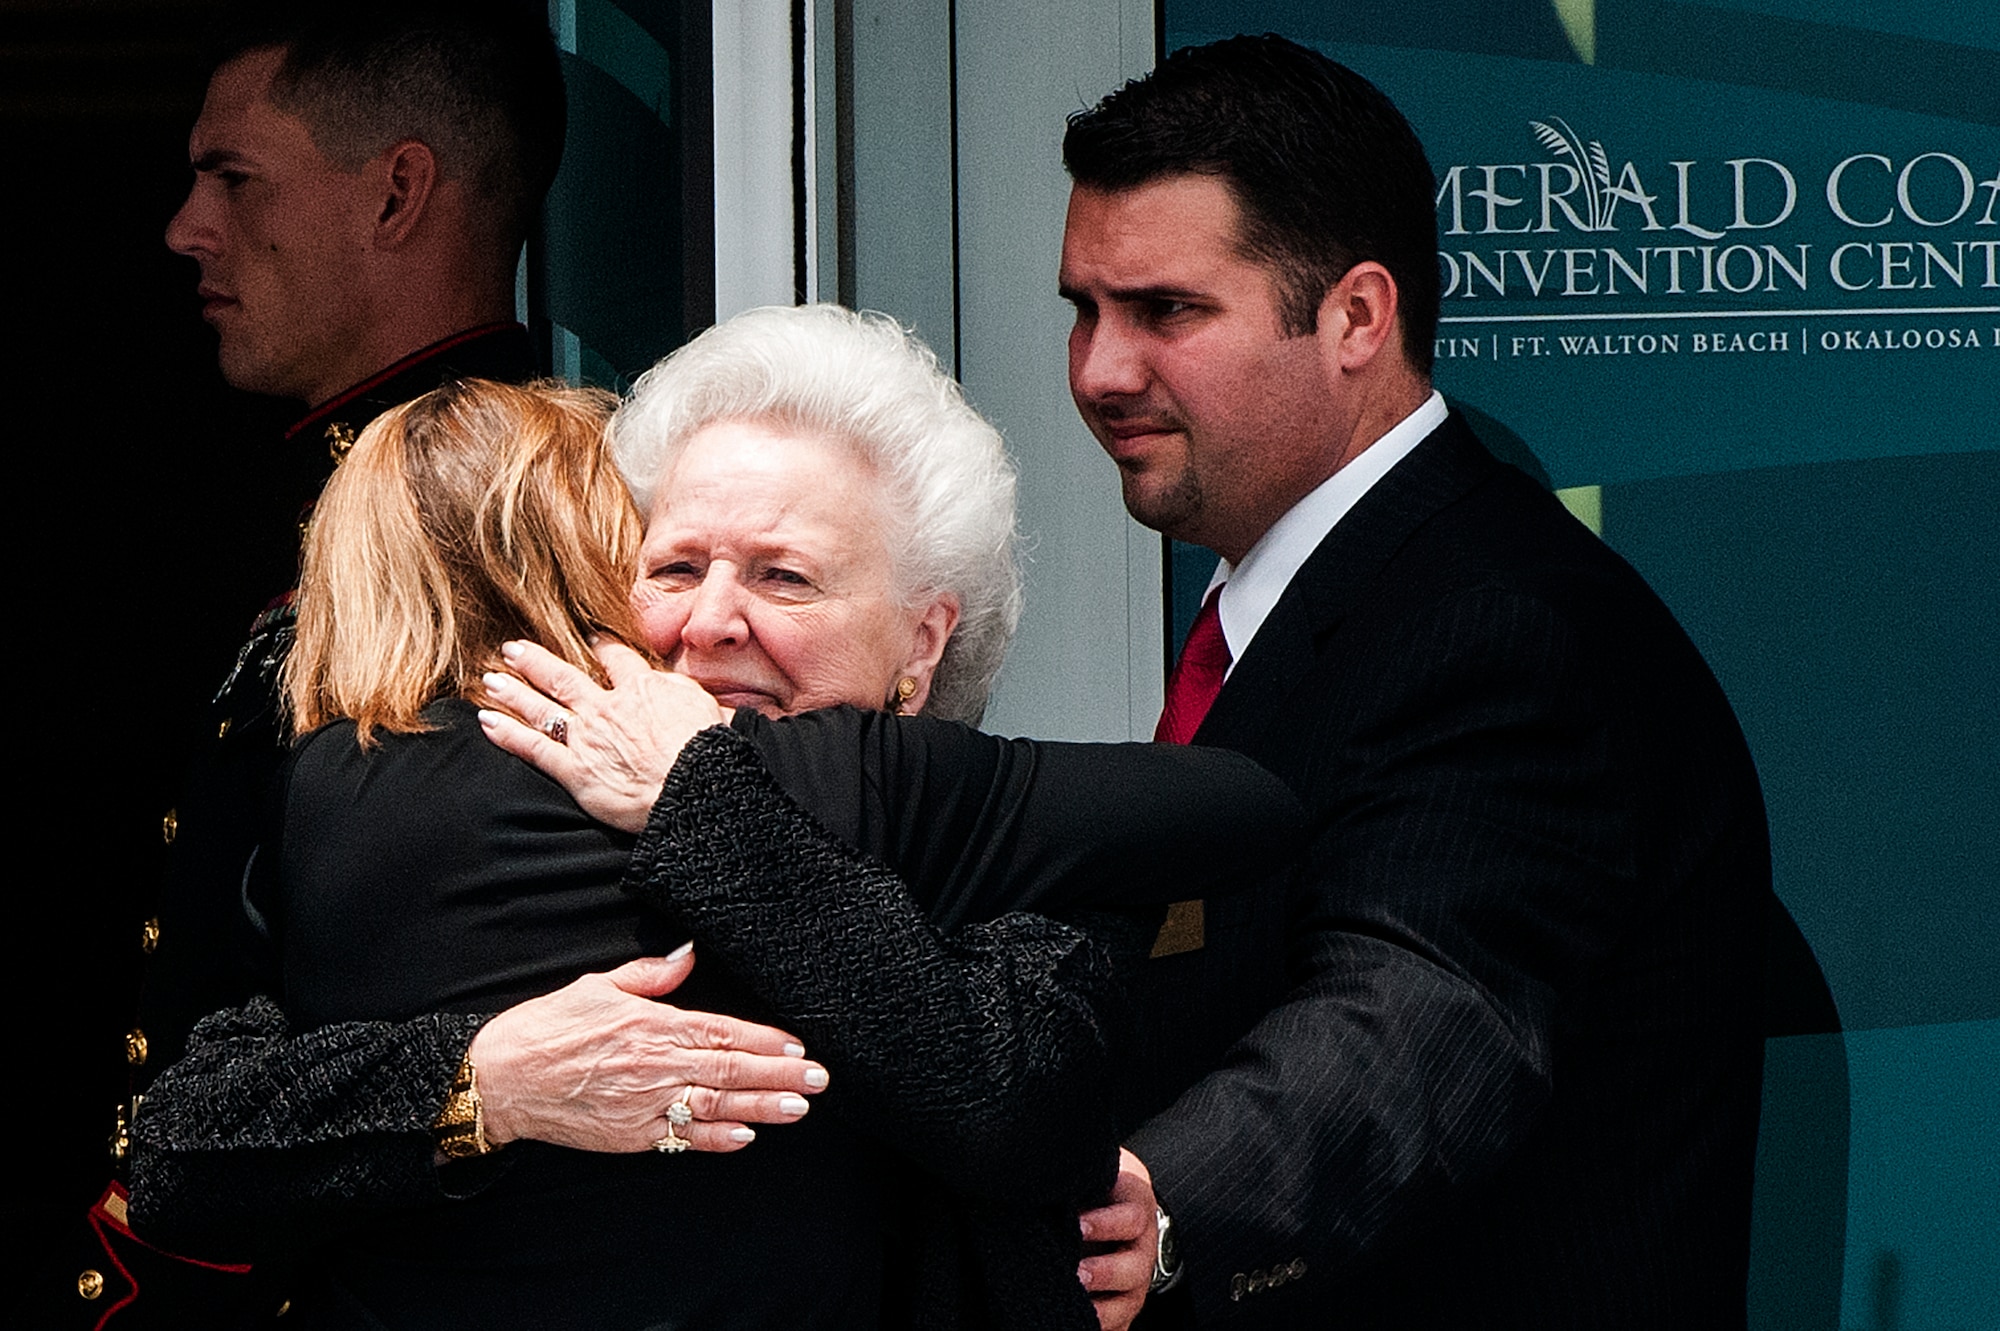 Doris Day, widow of Col. George “Bud” Day, received a hug during a memorial service for Day at the Emerald Coast Convention Center on Okaloosa Island, Fla., Aug. 1. Day, a Medal of Honor recipient and combat pilot with service in World War II, Korea and Vietnam, passed away July 28 at the age of 88. (U.S. Air Force Photo / Airman 1st Class Christopher Callaway)